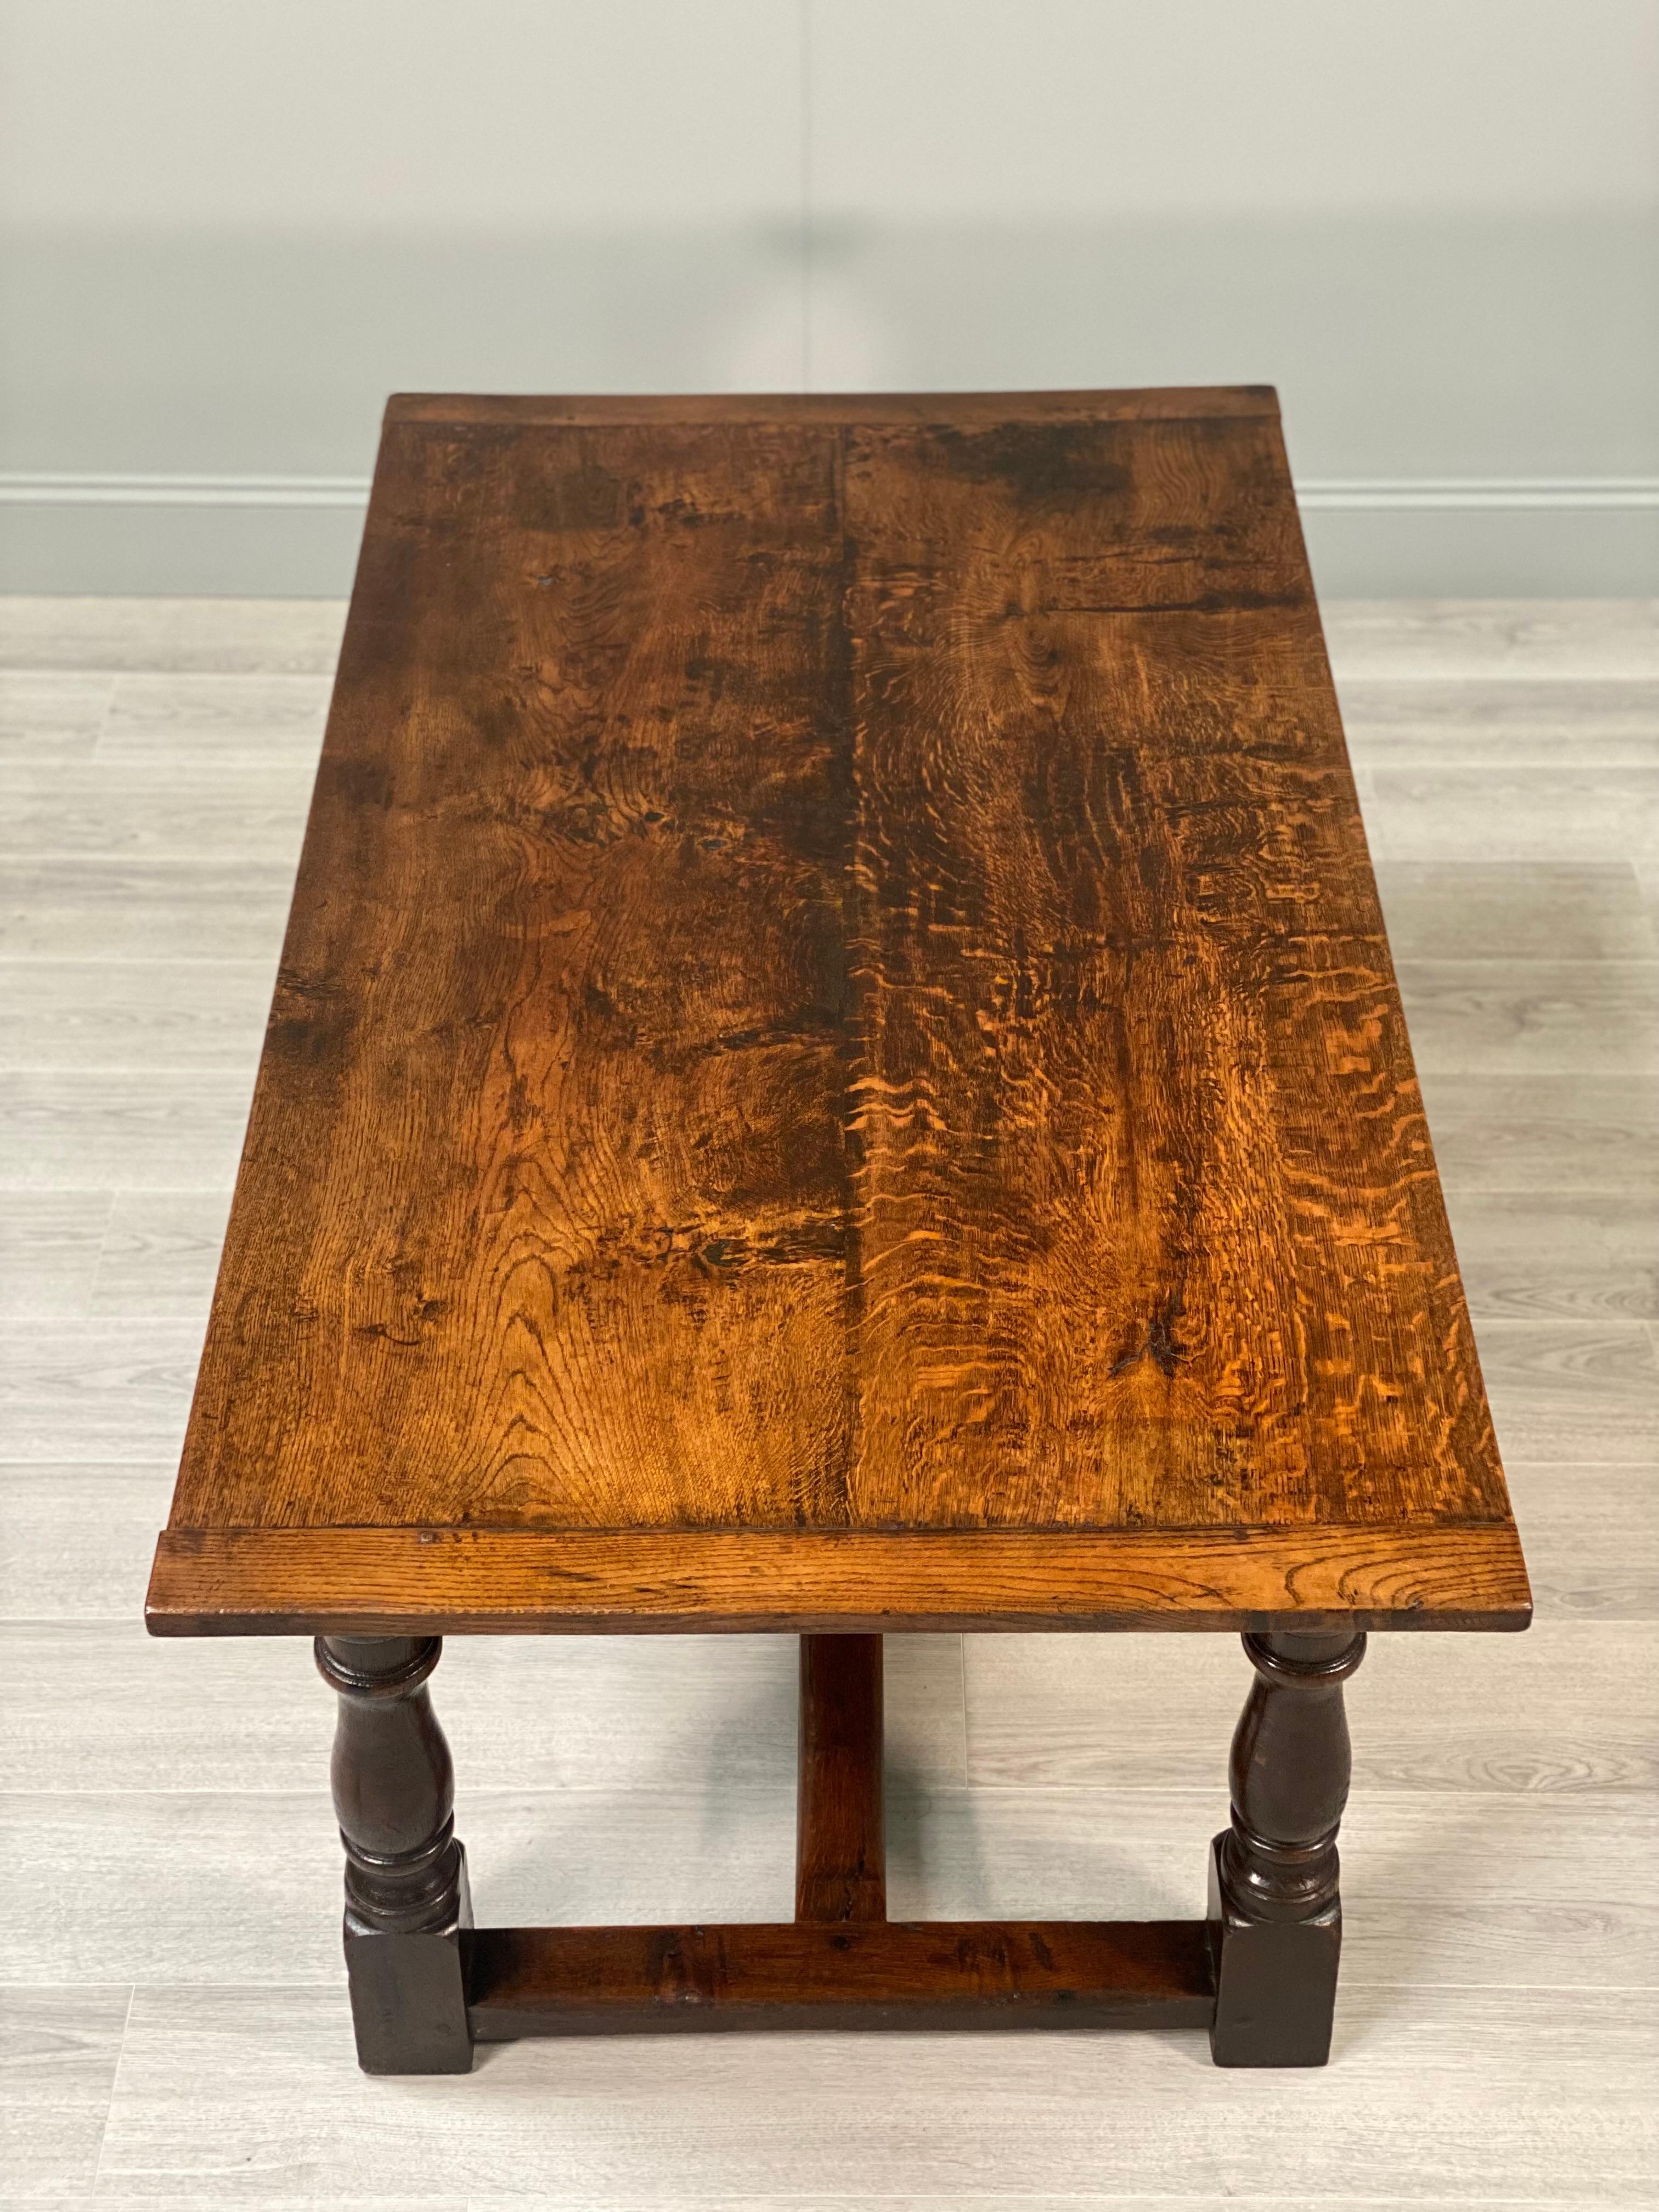 A superb Oak Refectory table dating to c.1680. The table sits on gun barrel legs with side and centre stretchers. It has a two plank quarter sawn oak top with bread board edges and only the finest English oak timber has been used in the